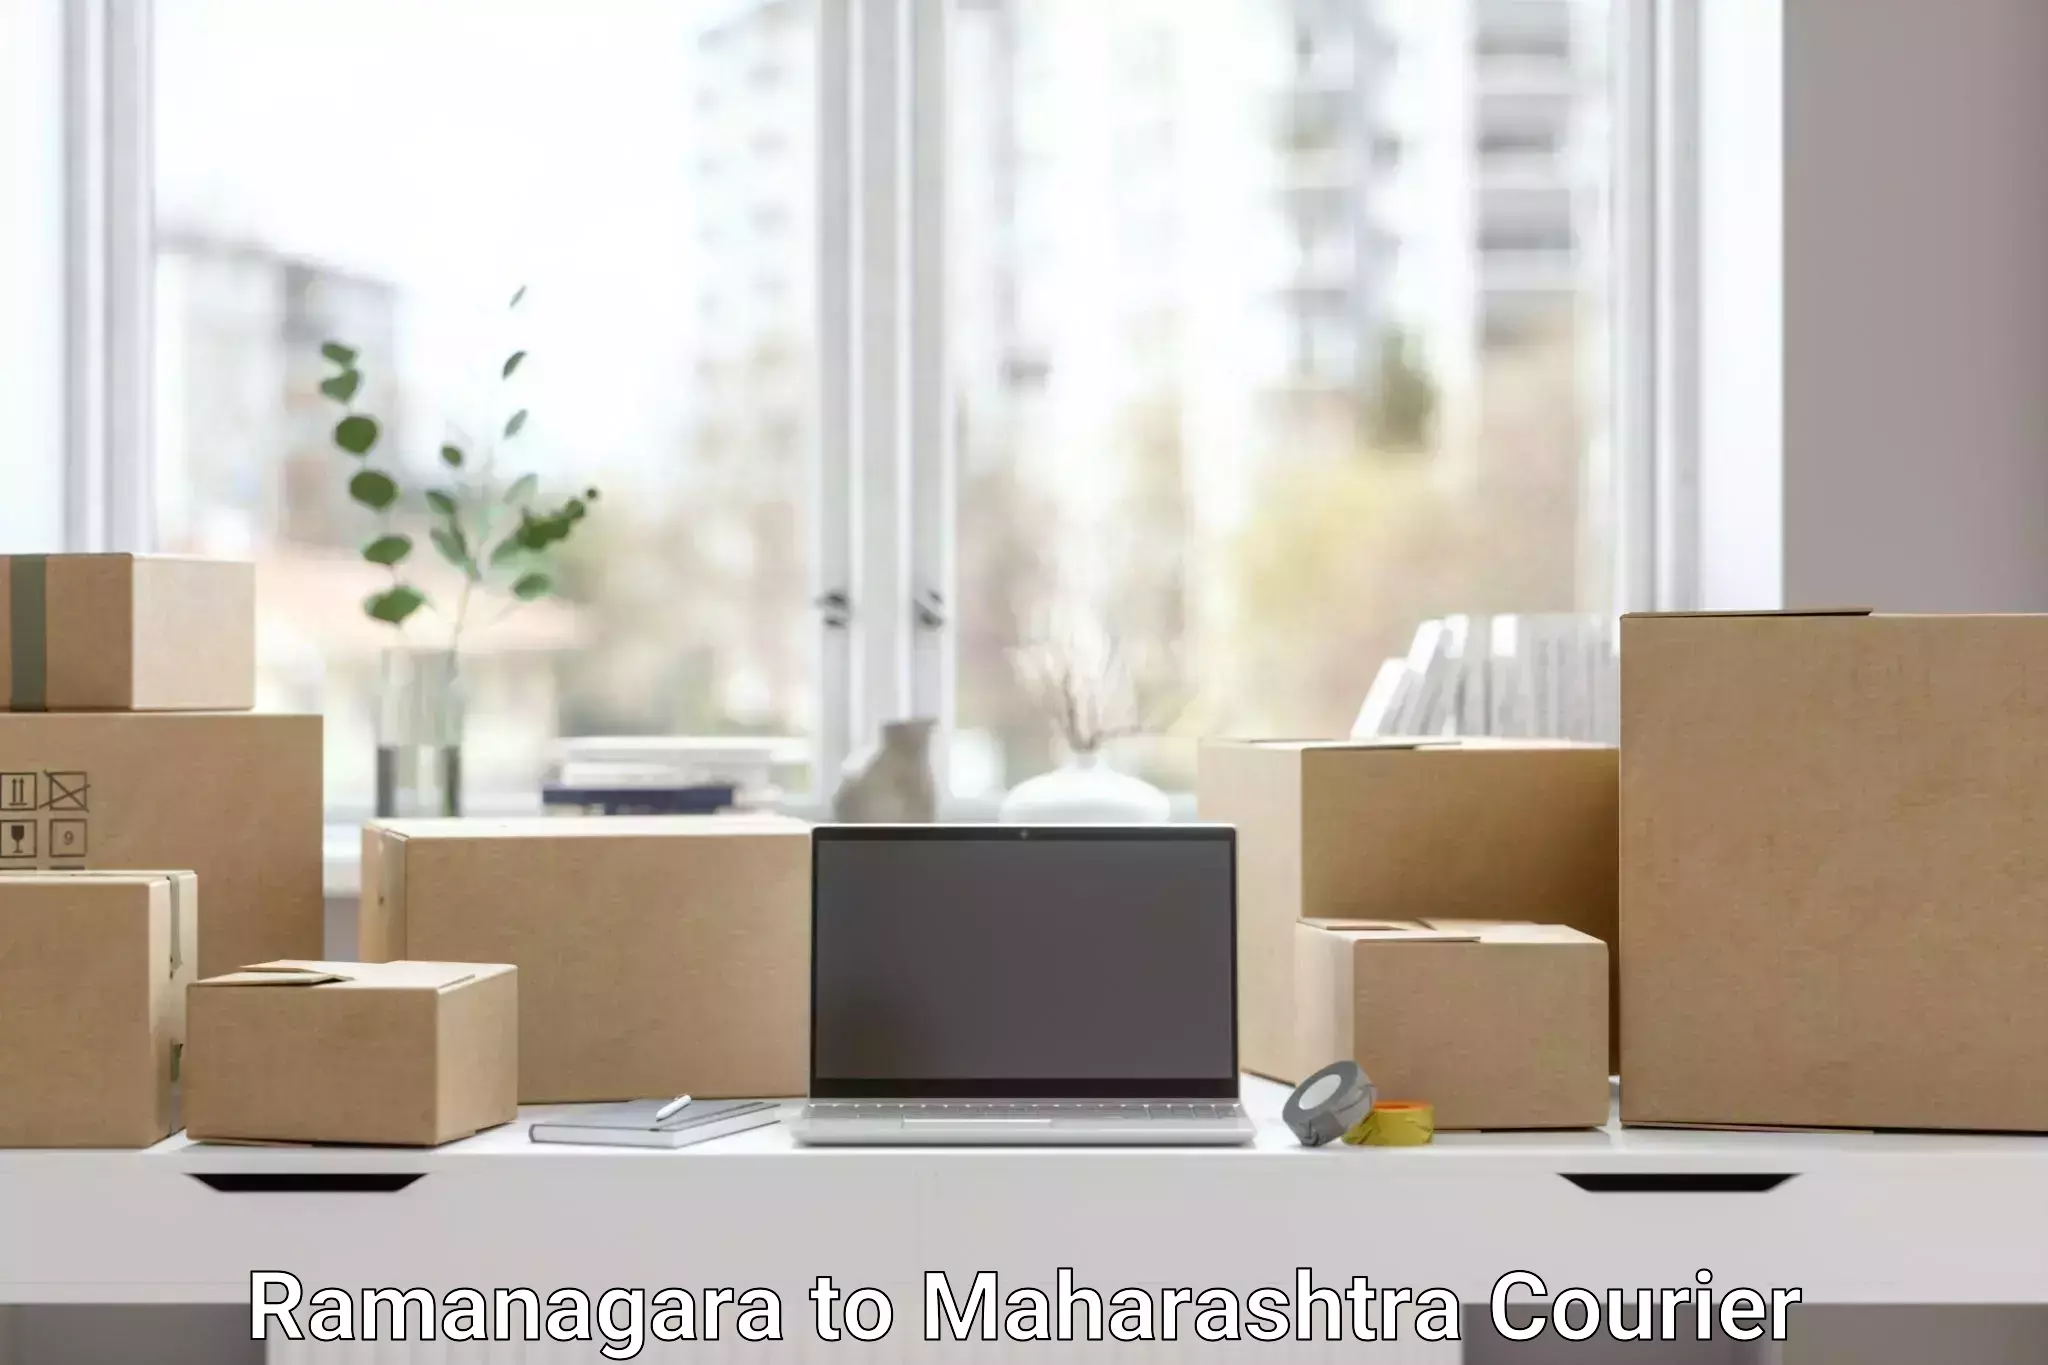 Package delivery network Ramanagara to Yeola